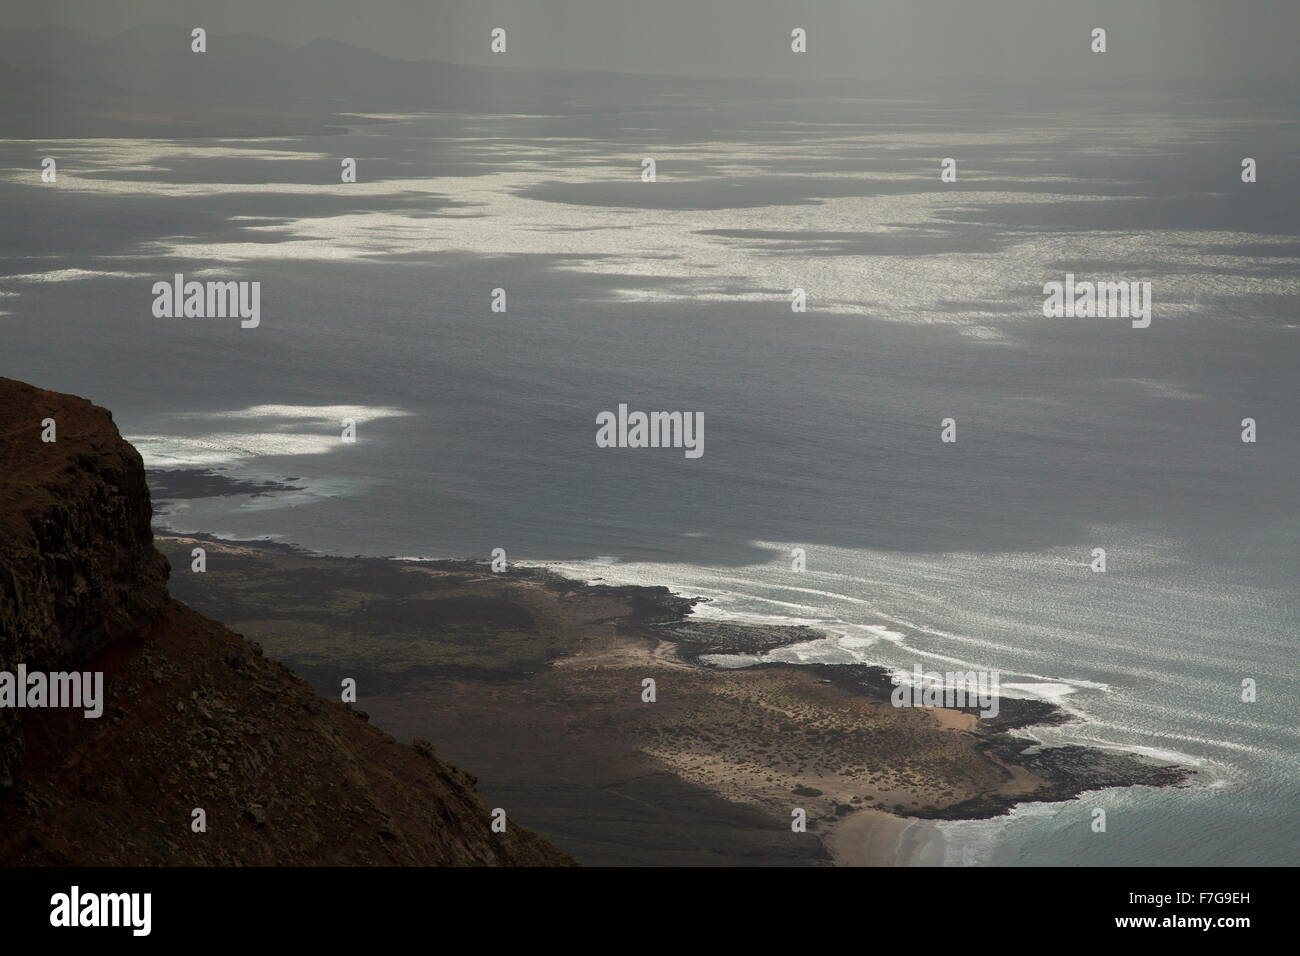 Light and shade on the ocean in the view from El Risco cliffs, Lanzarote. Stock Photo